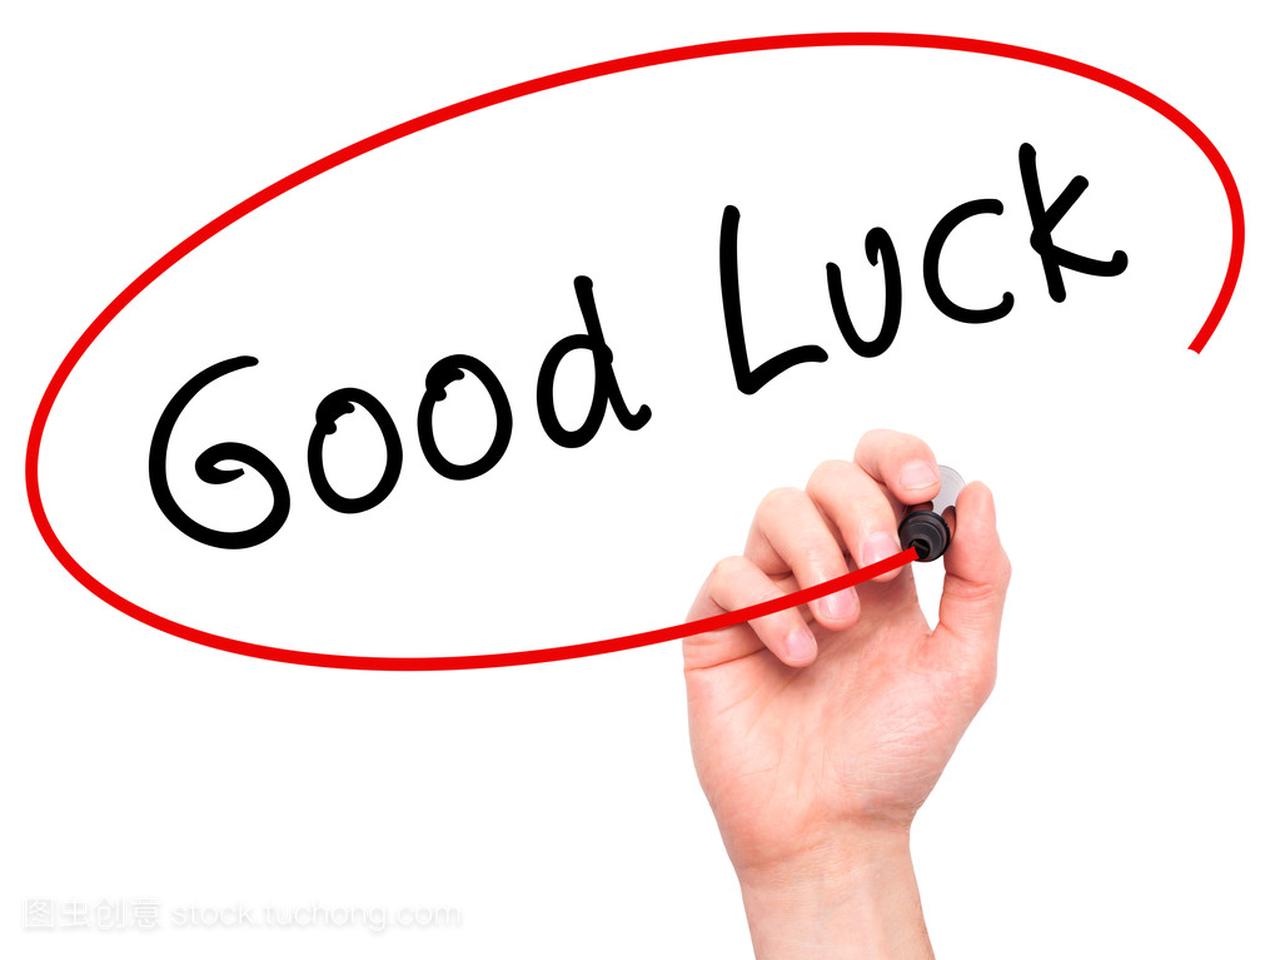 Man Hand writing Good Luck with marker on tra